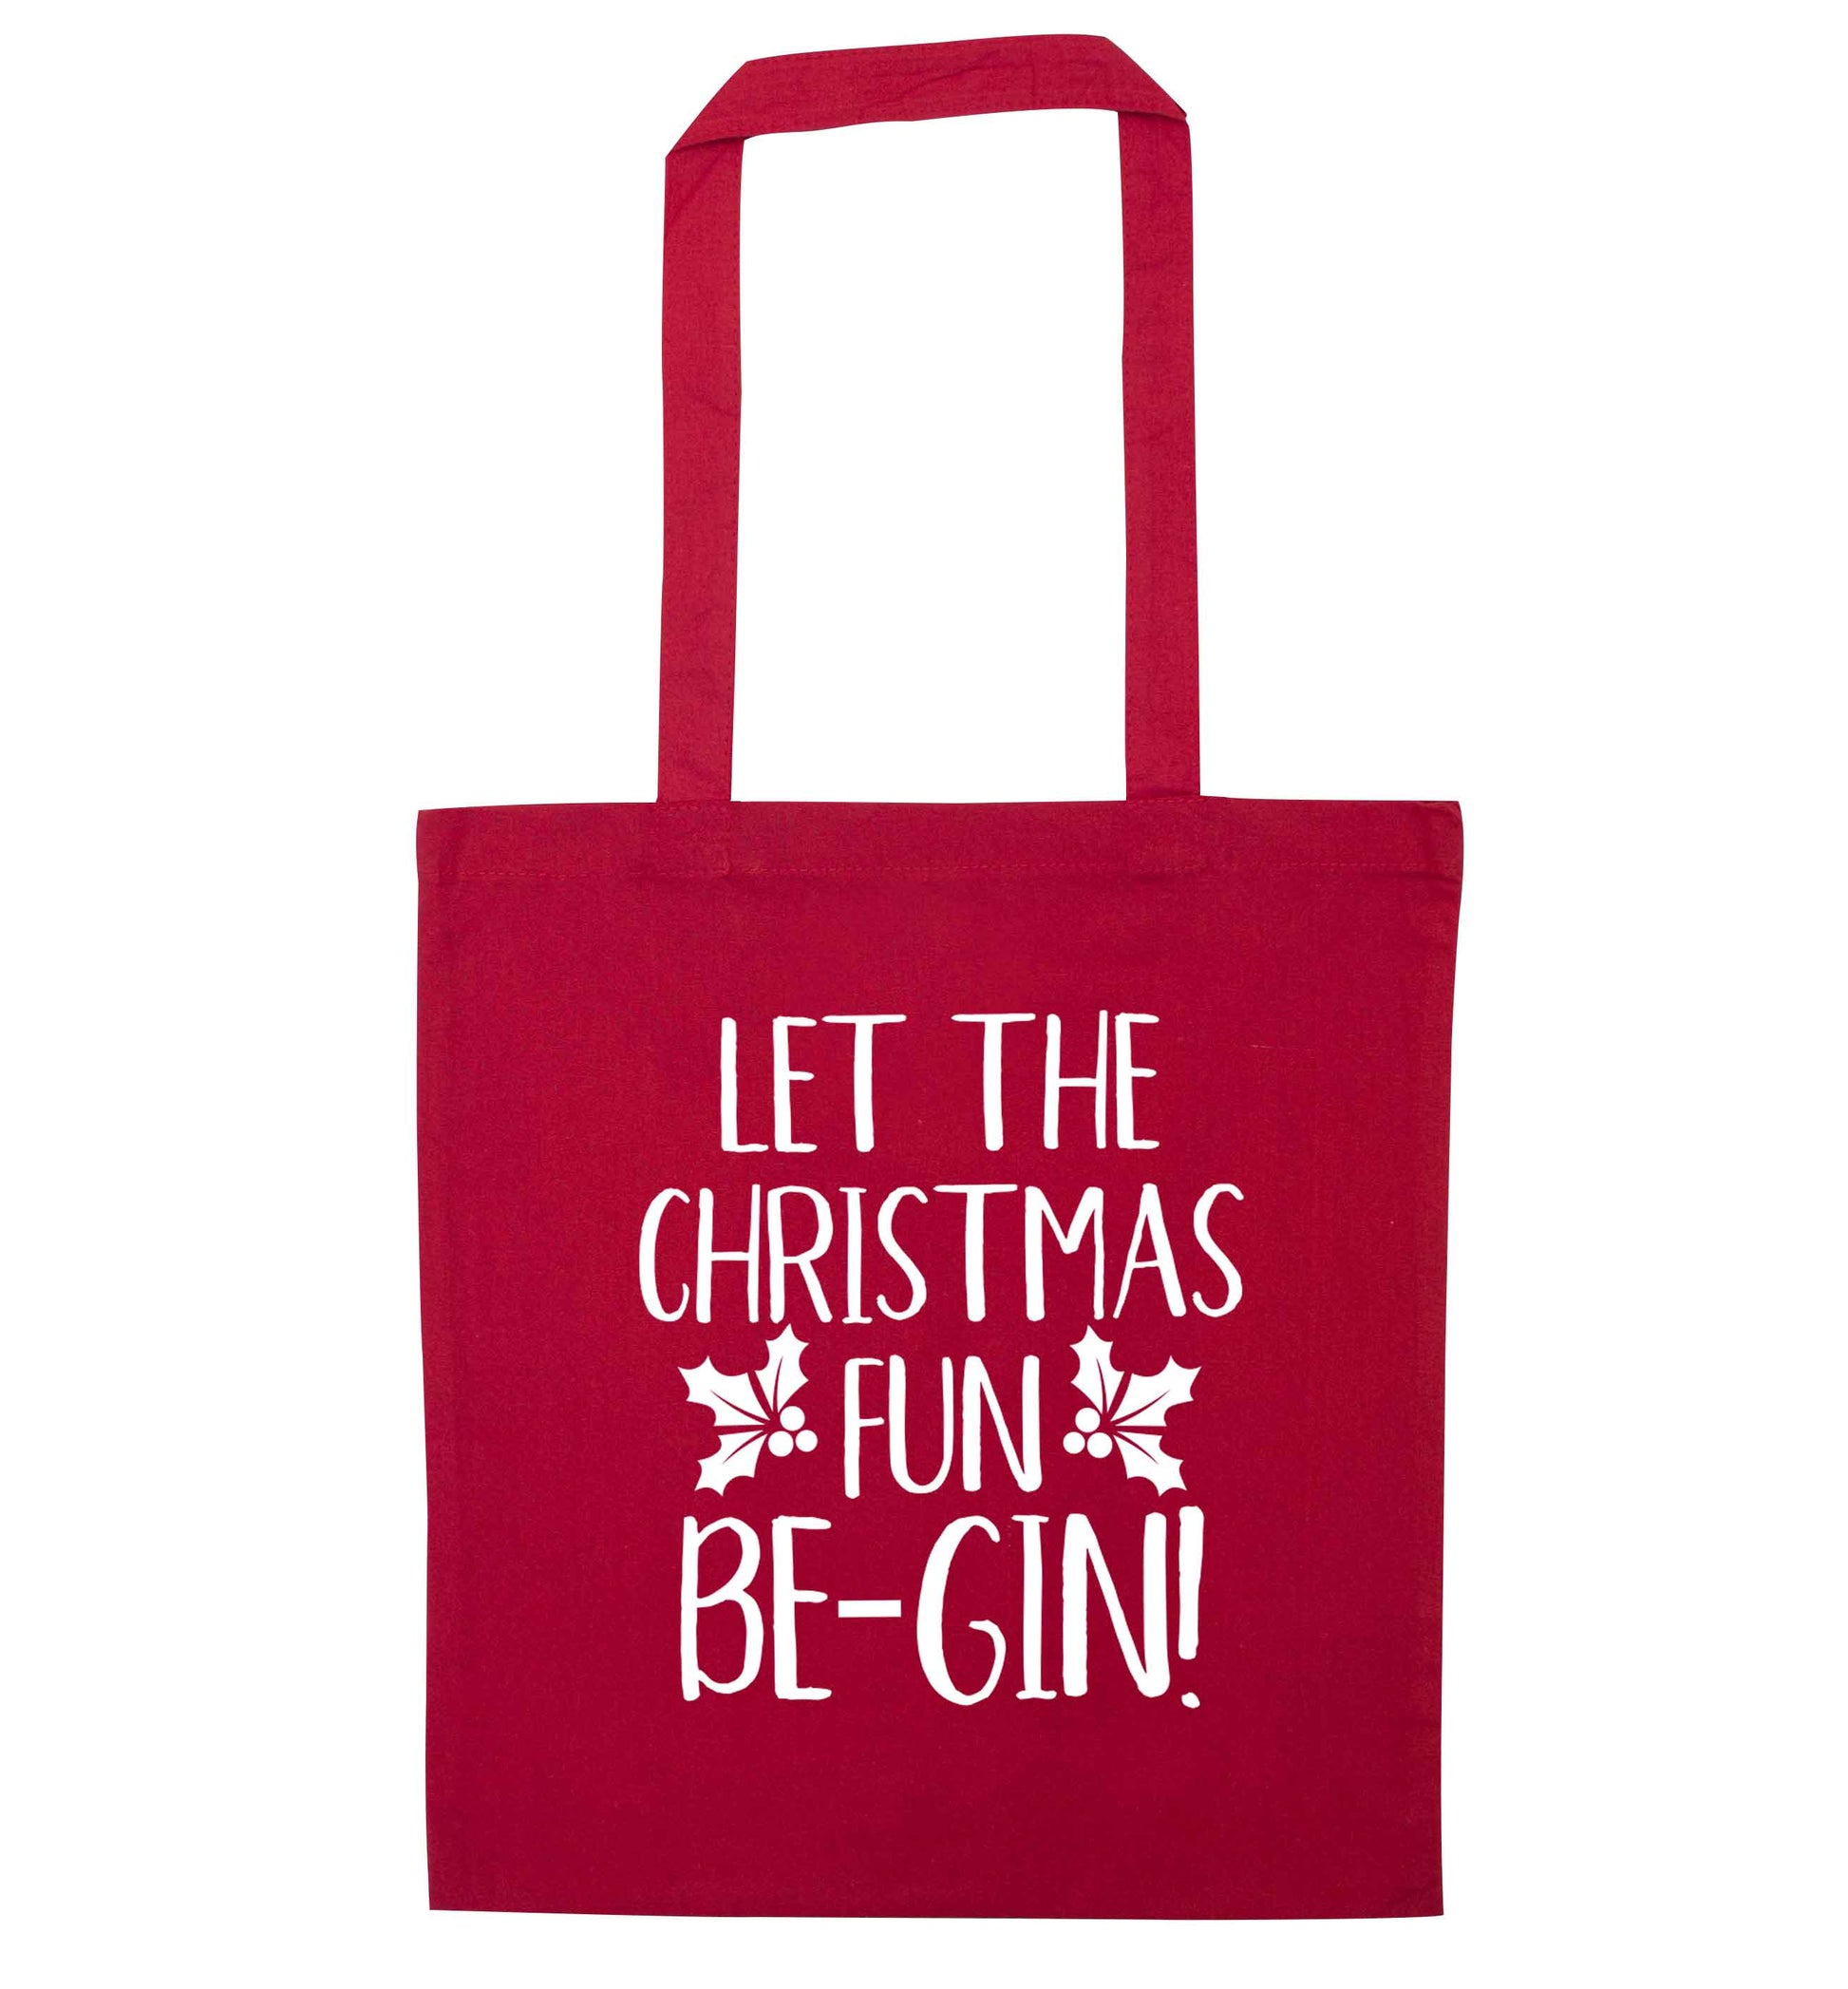 Let the christmas fun be-gin red tote bag